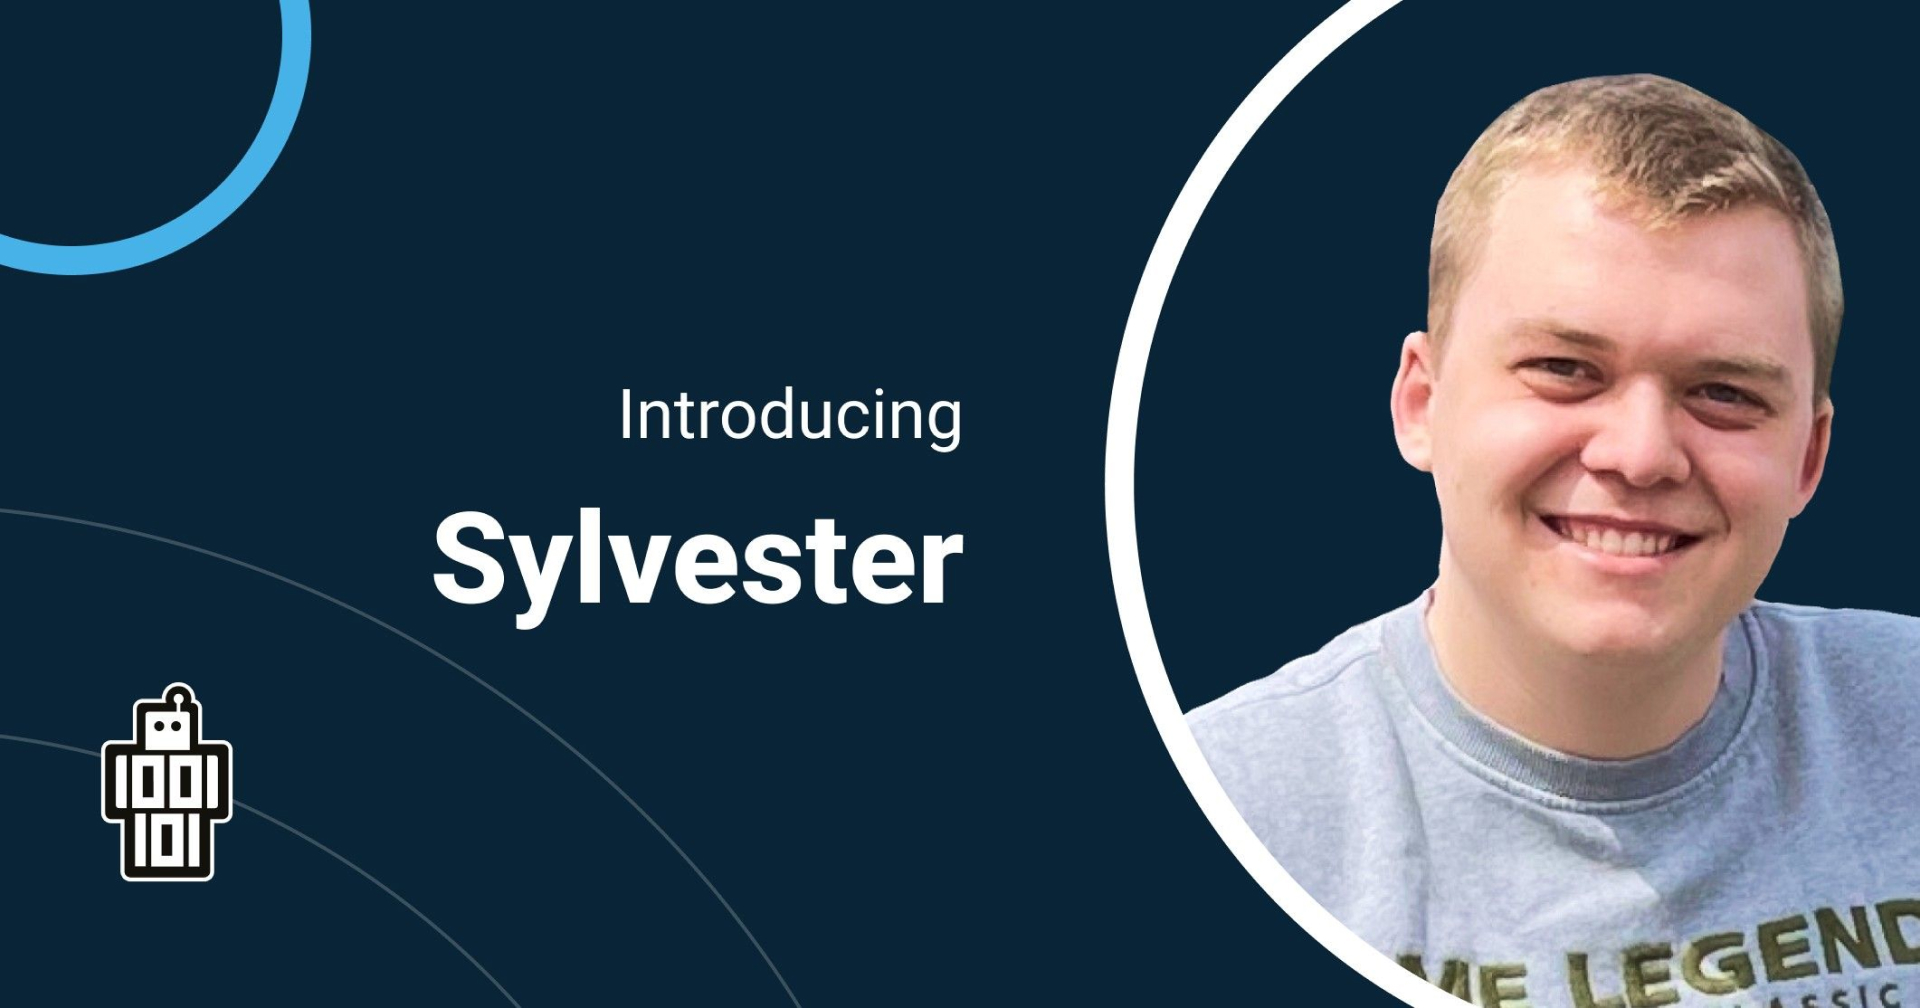 Meet Sylvester - We would like to introduce you to our new team member Sylvester